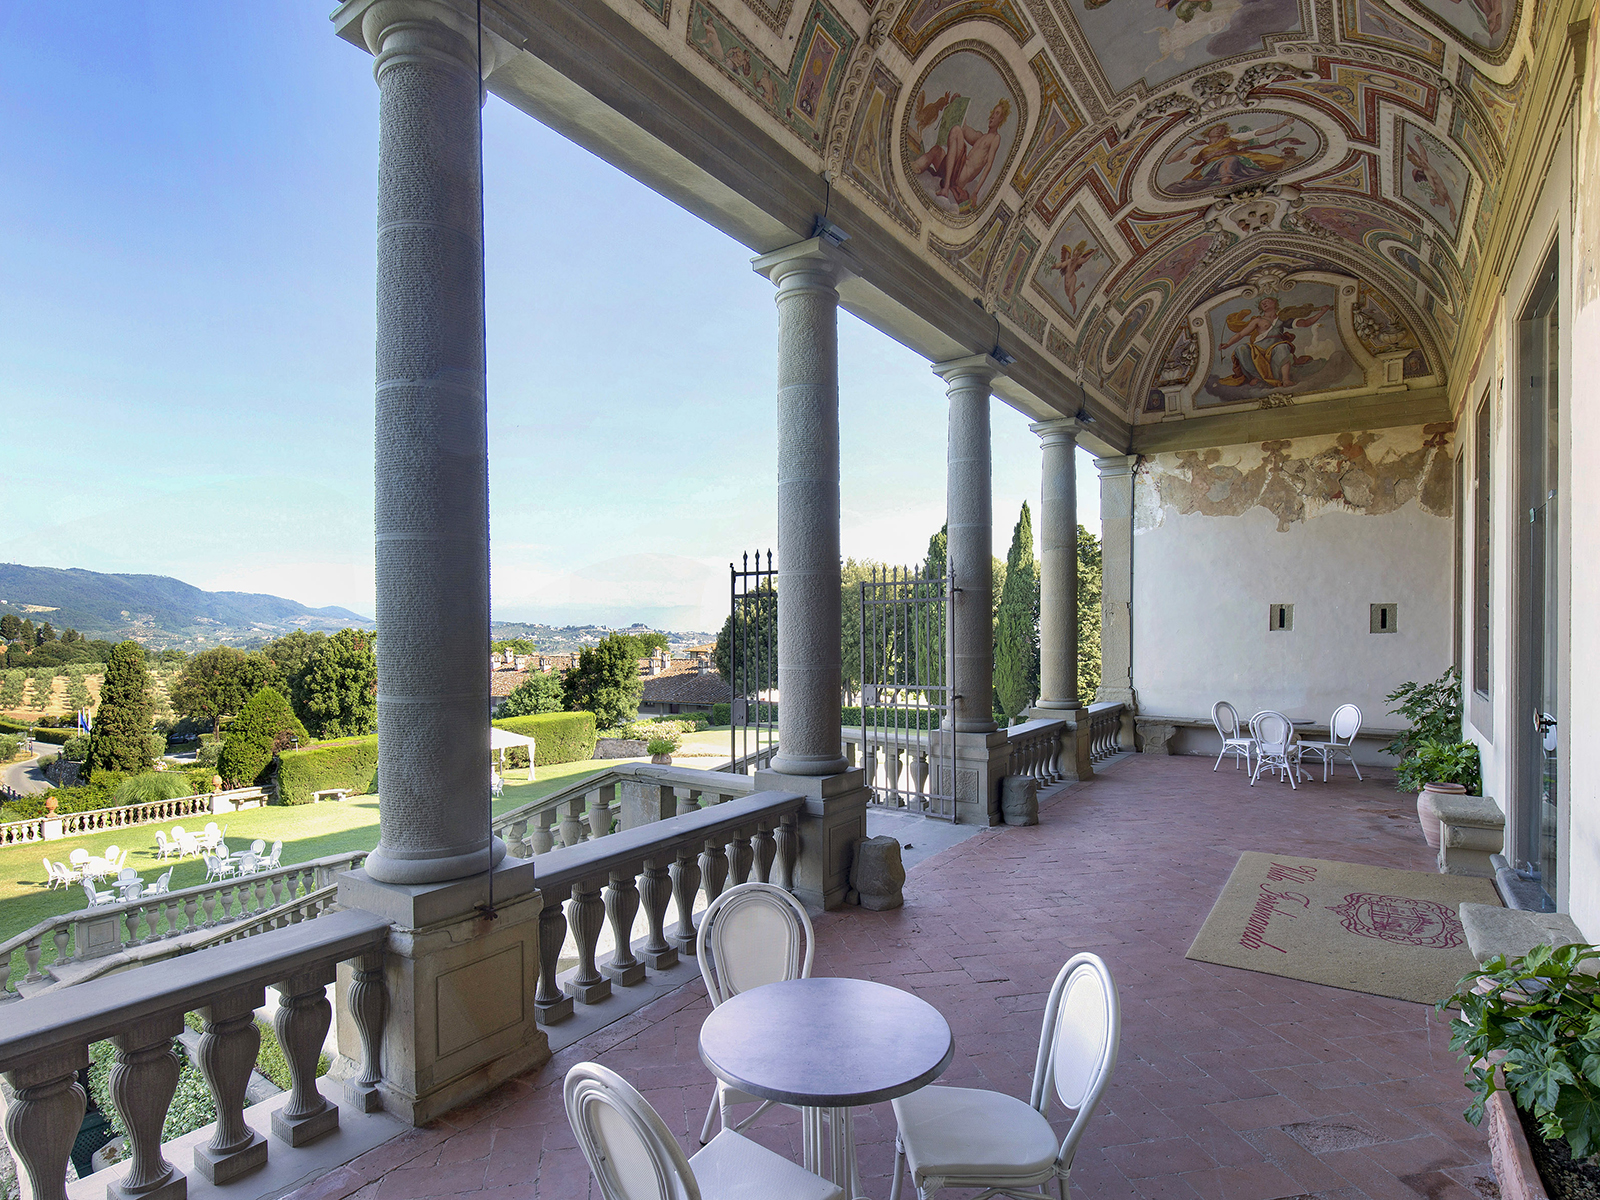 The grand entrance to Tenuta Di Artimino with pillars, a decorated ceiling, and stunning views of the countryside